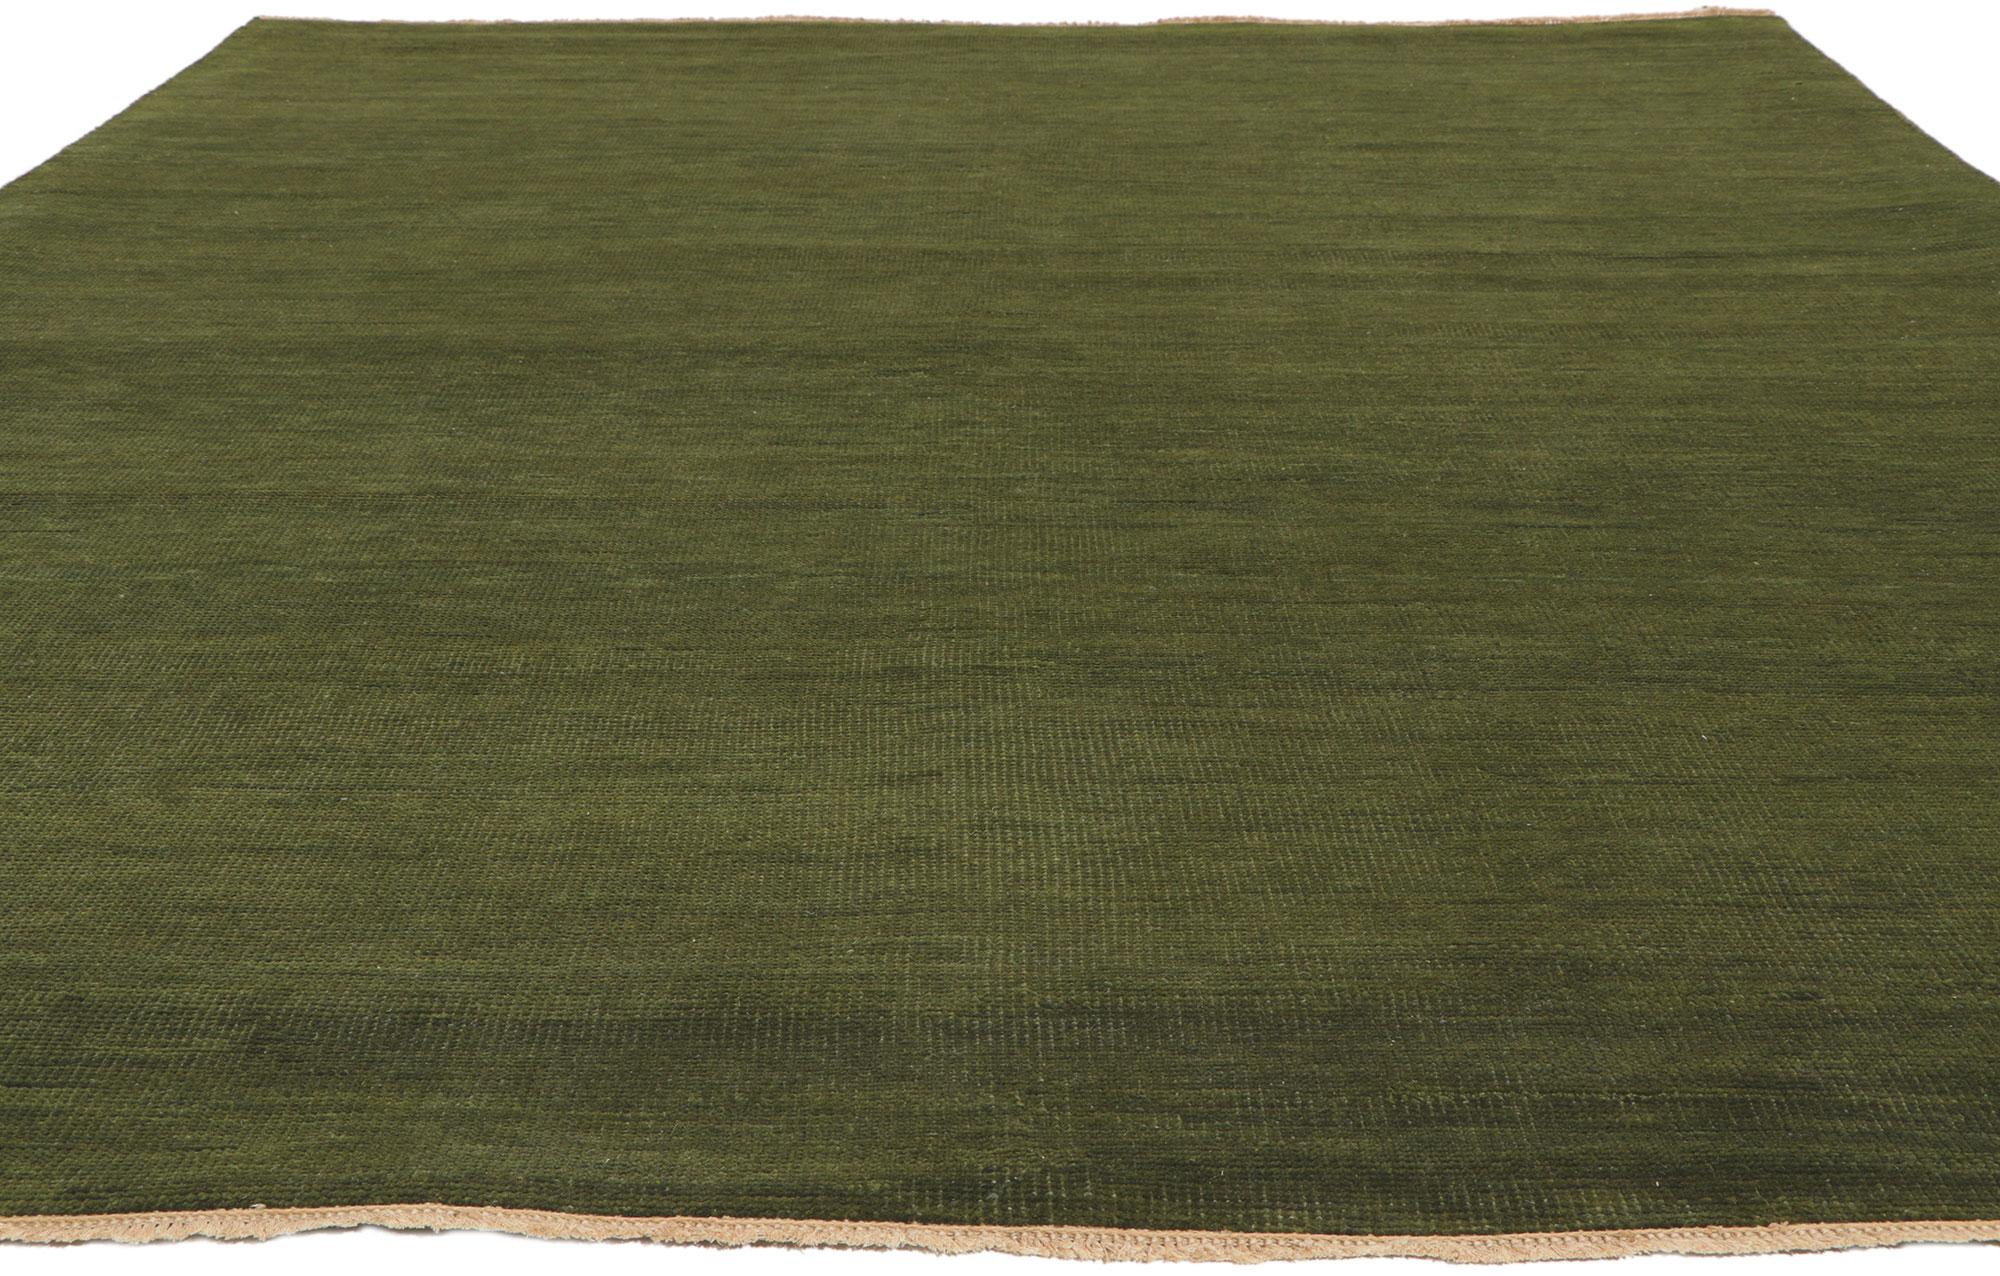 Indian New Earthy Modern Area Rug with Biophilic Design For Sale